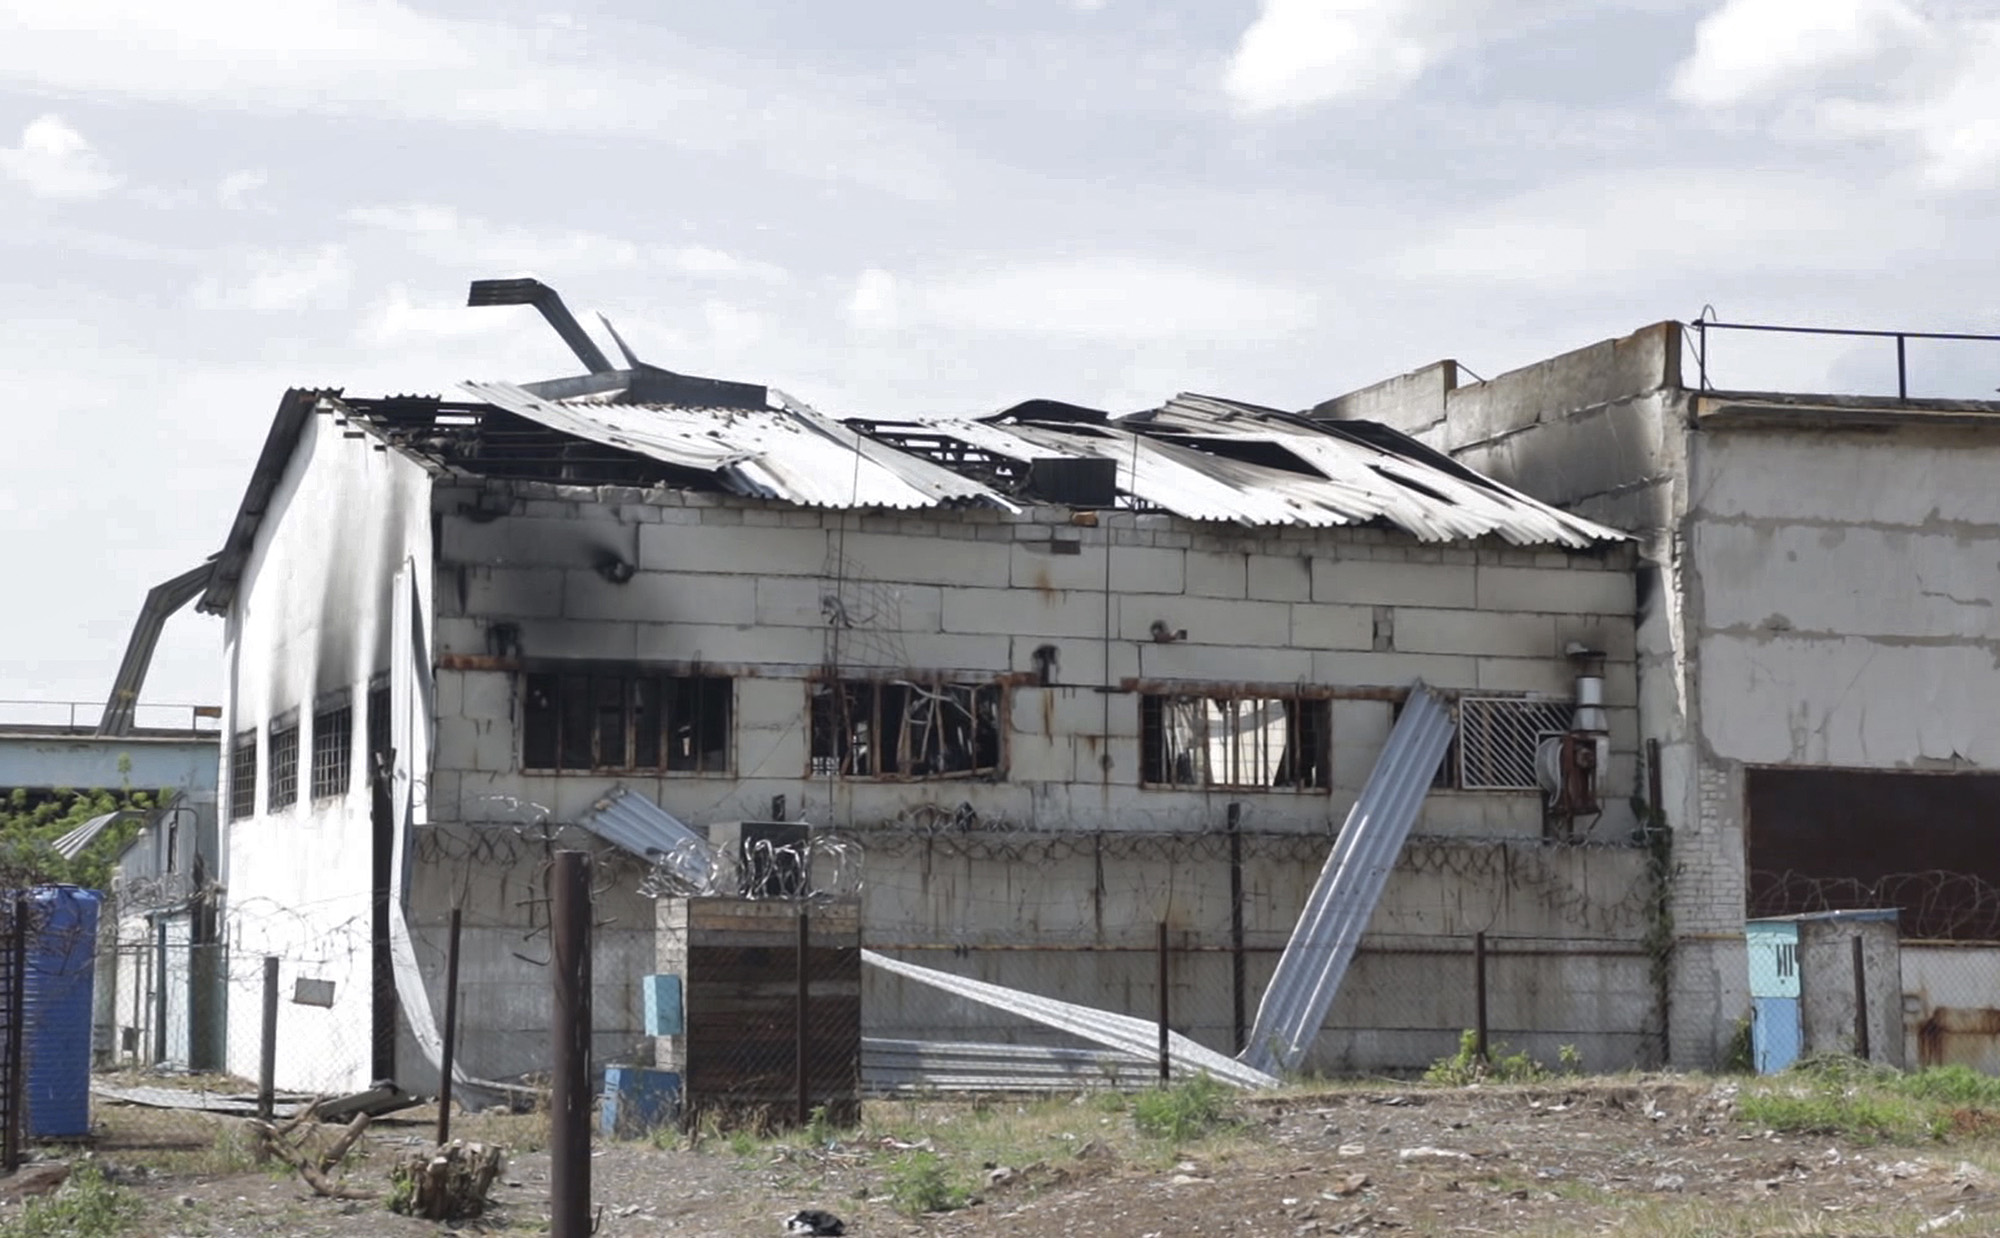 The destroyed barrack at a prison in Olenivka, Ukraine is seen on Friday, July 29.